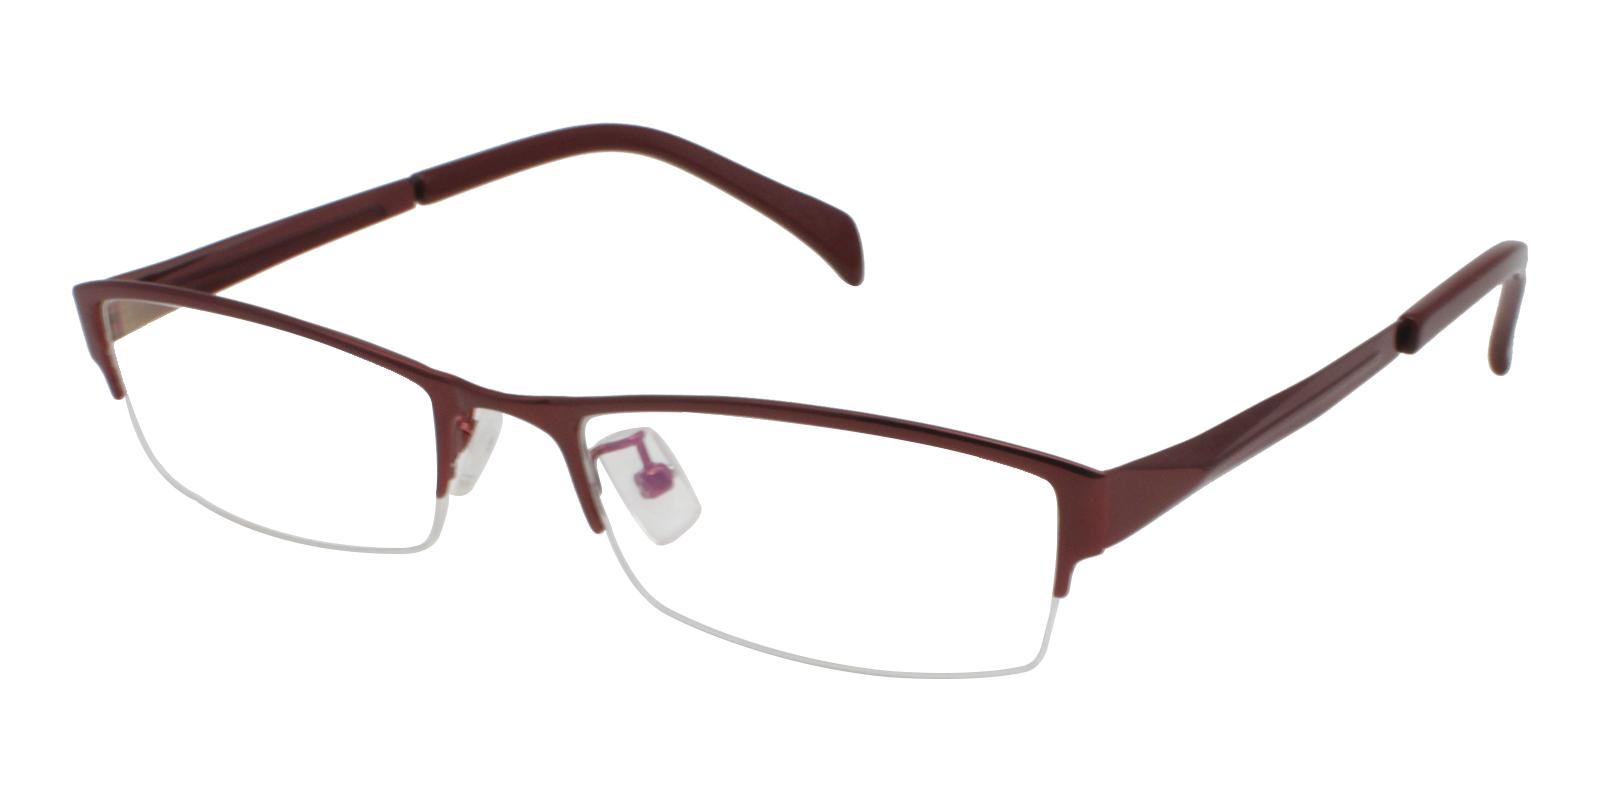 Riley Red Metal Eyeglasses , NosePads Frames from ABBE Glasses